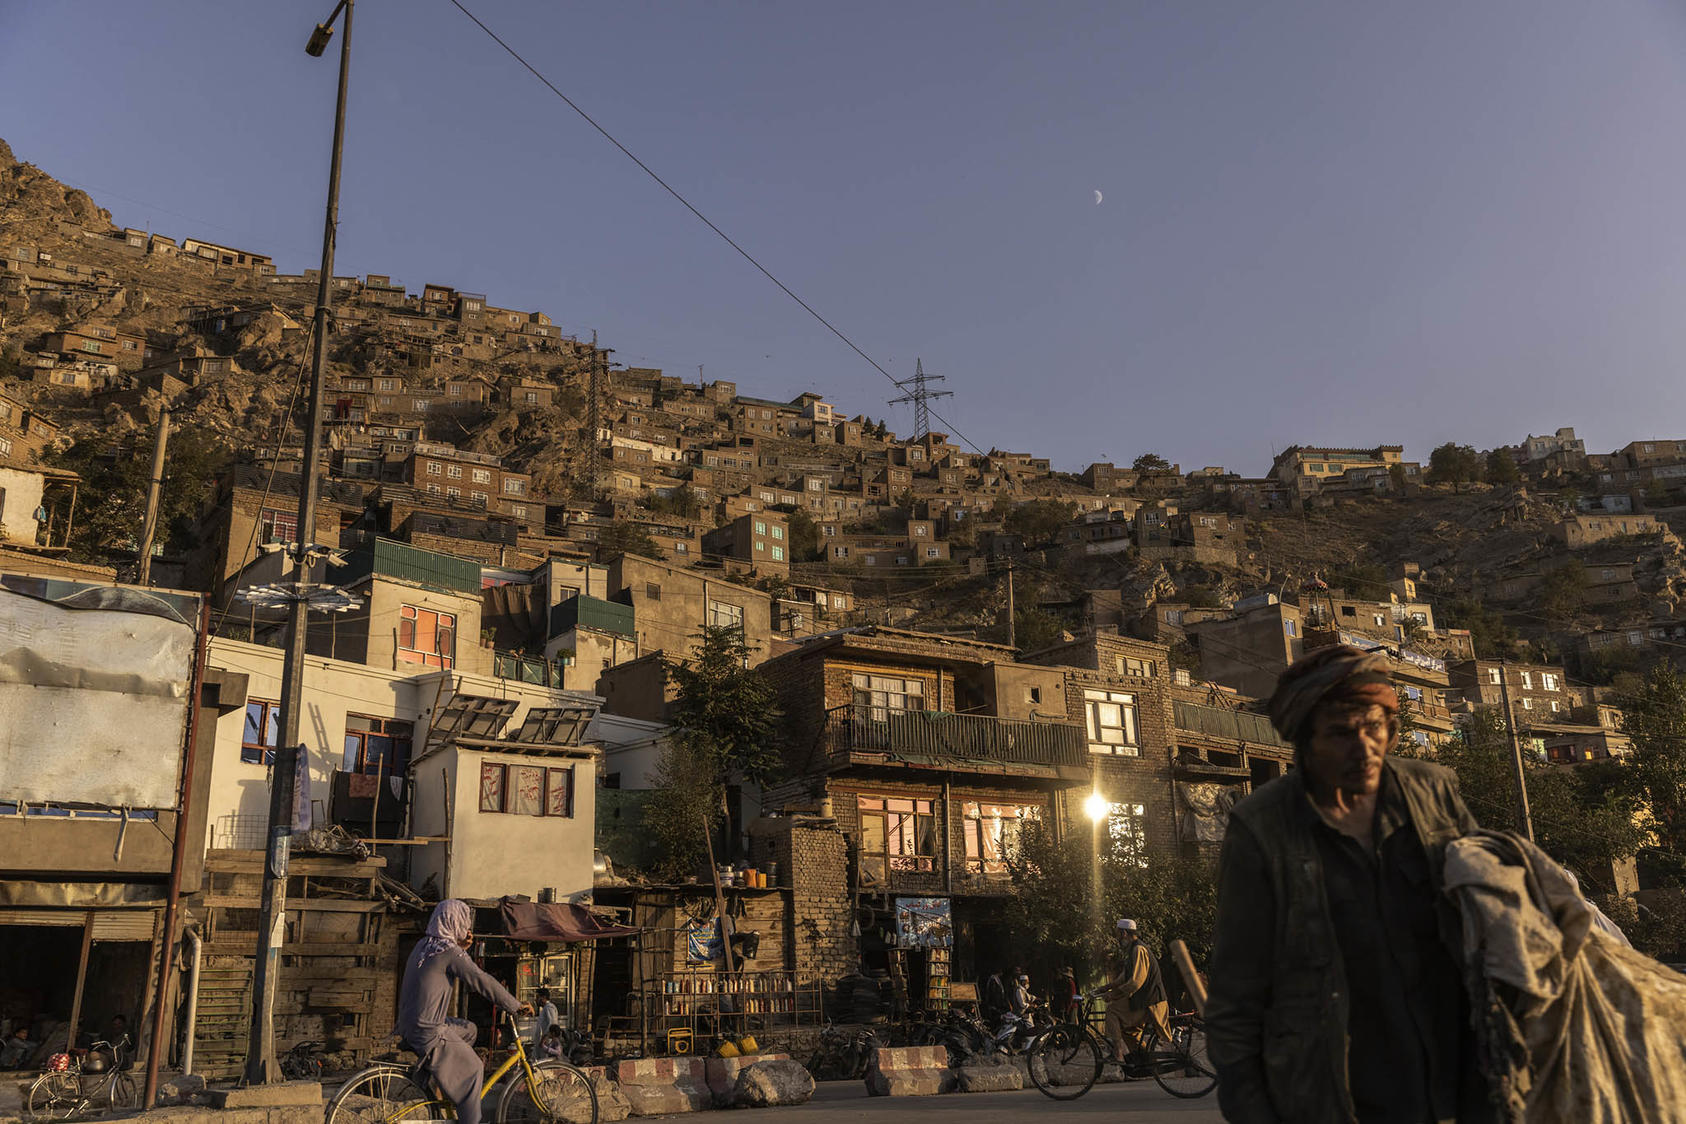 Houses in a poorer neighborhood of Kabul Afghanistan on Monday, Sept. 13, 2021. (Victor J. Blue/The New York Times) 